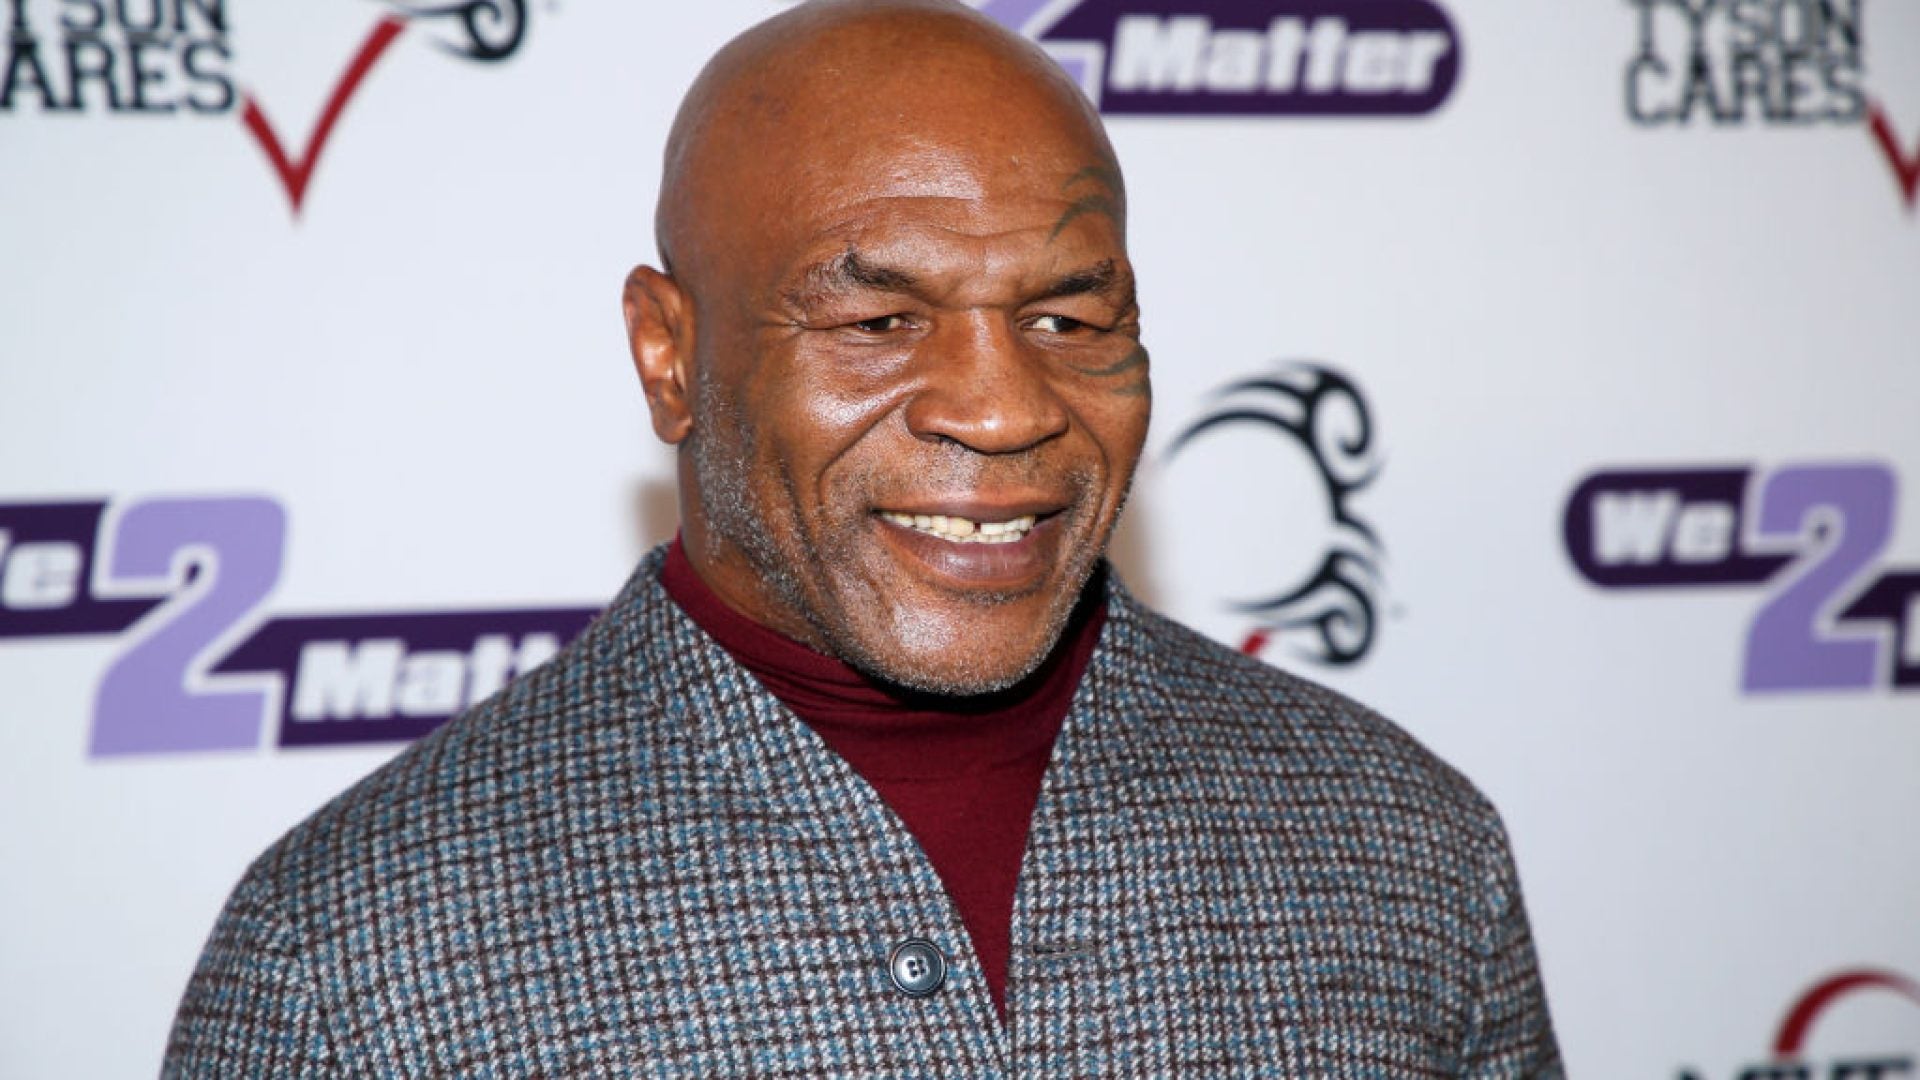 Mike Tyson Launches Ear-Shaped Line Of Cannabis Gummies “Mike Bites”